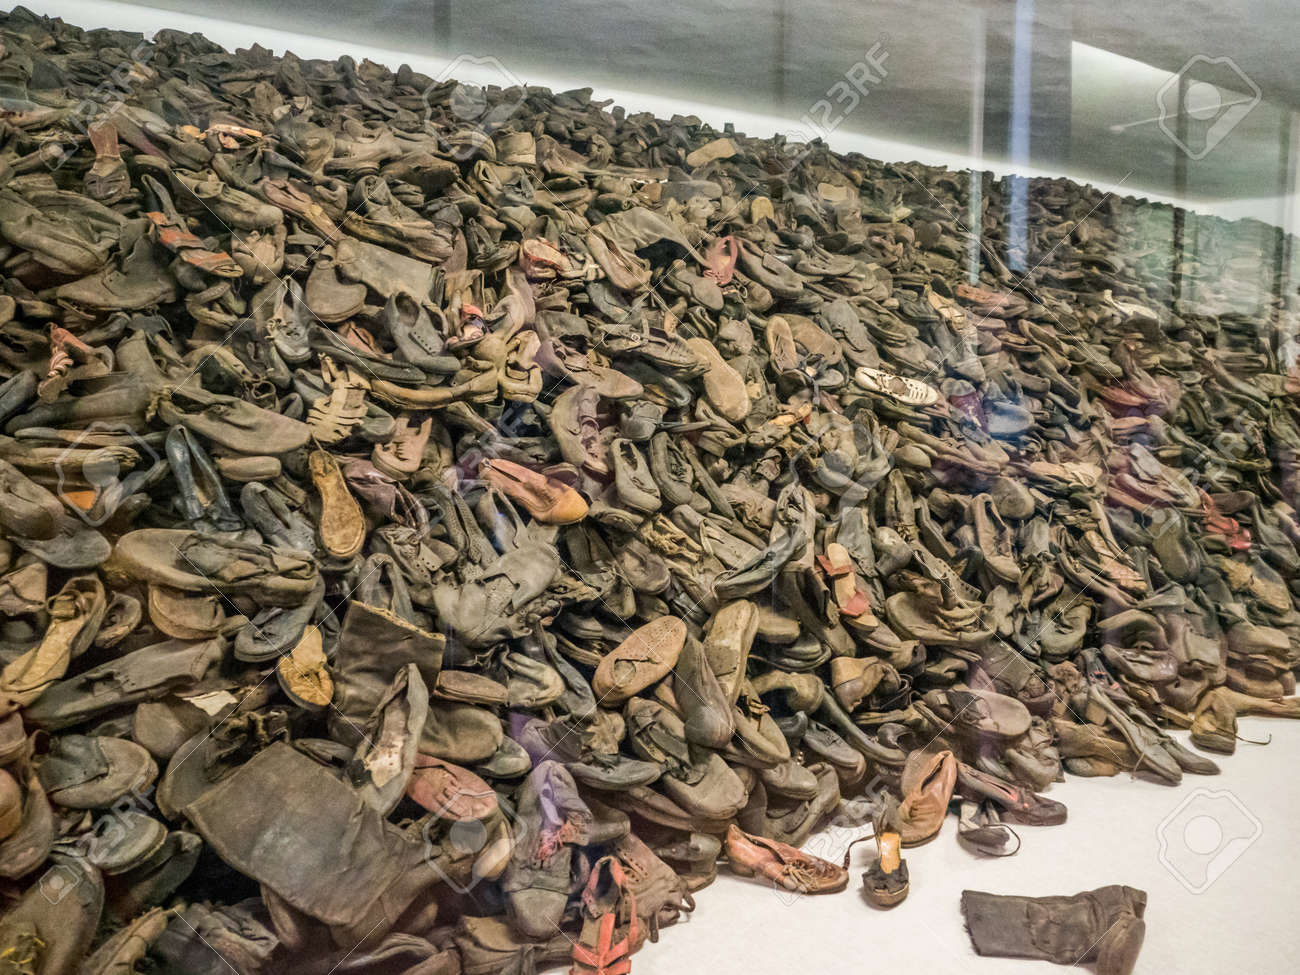 132984377-auschwitz-o%C5%9Bwi%C4%99cim-poland-june-05-2019-the-shoes-from-the-people-who-were-killed-in-auschwitz-the-bi.jpg